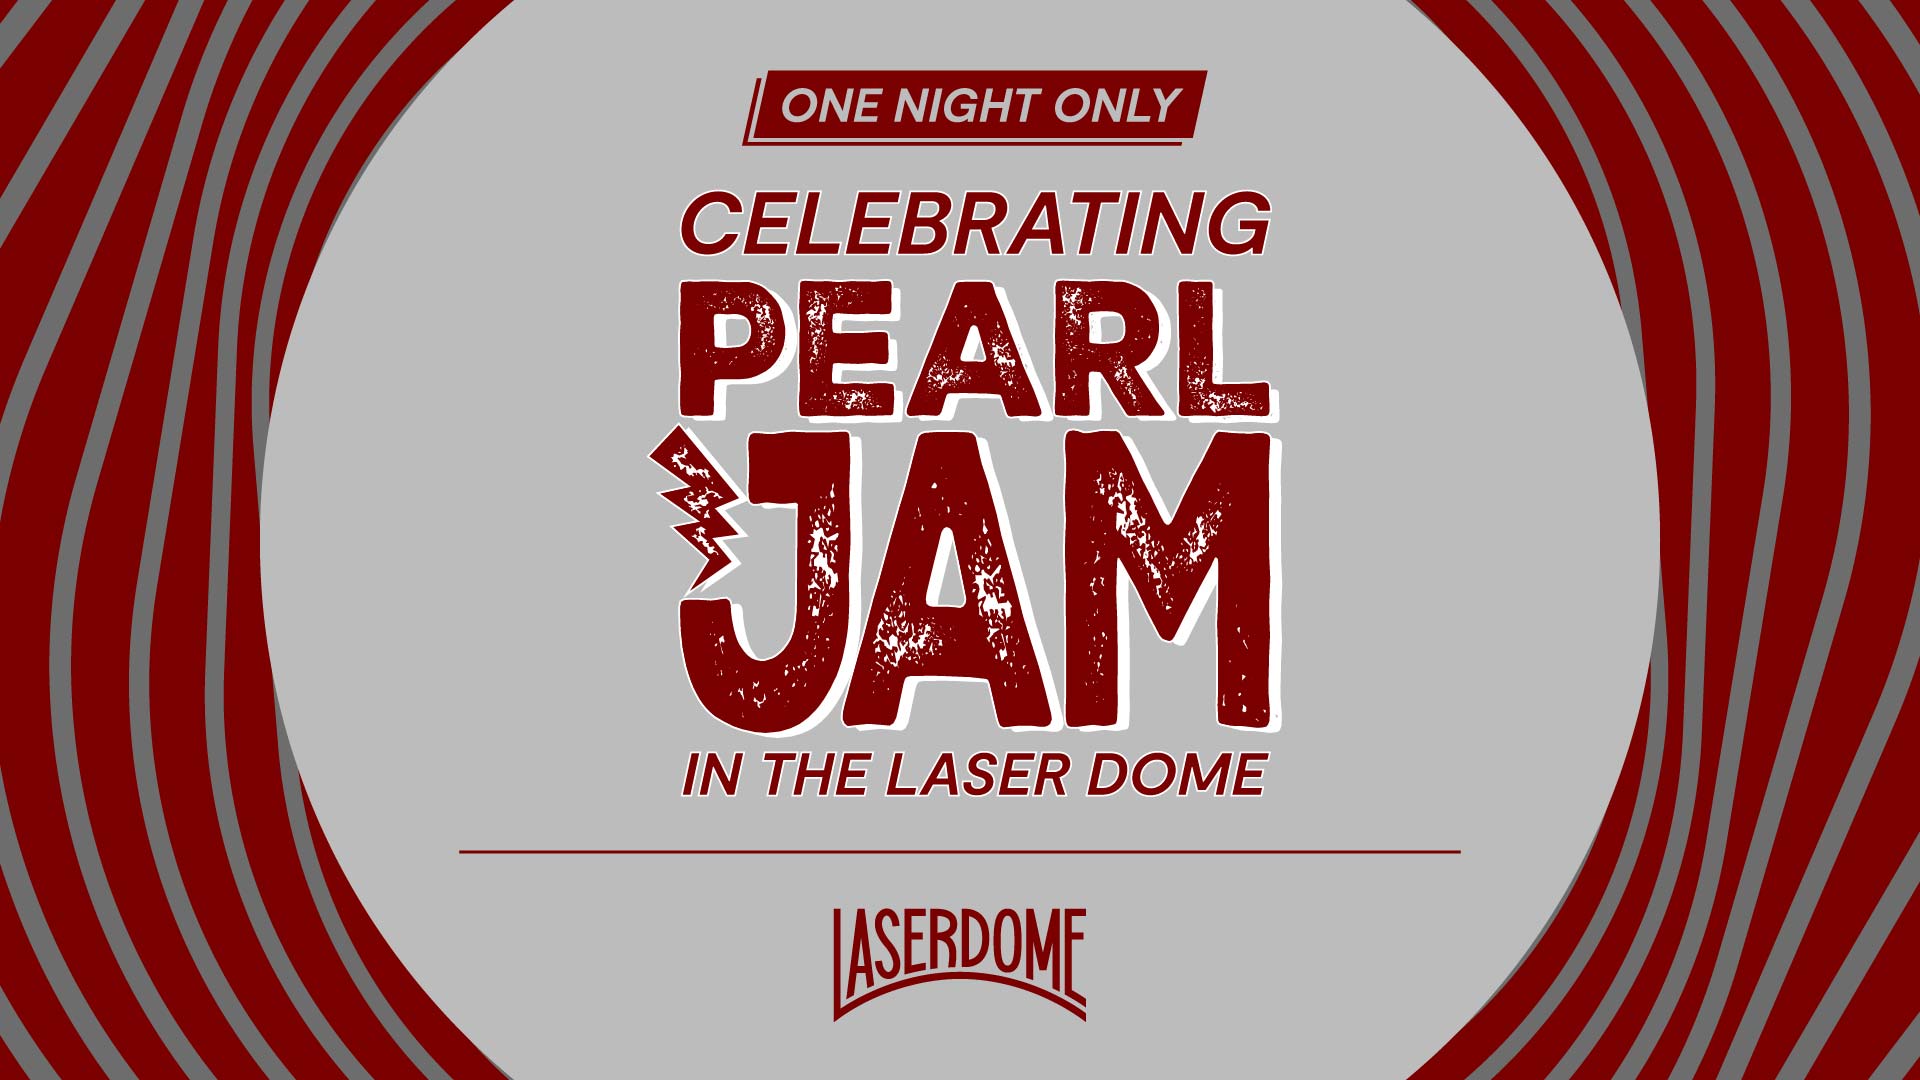 One night only: Celebrating Pearl Jam in the Laser Dome